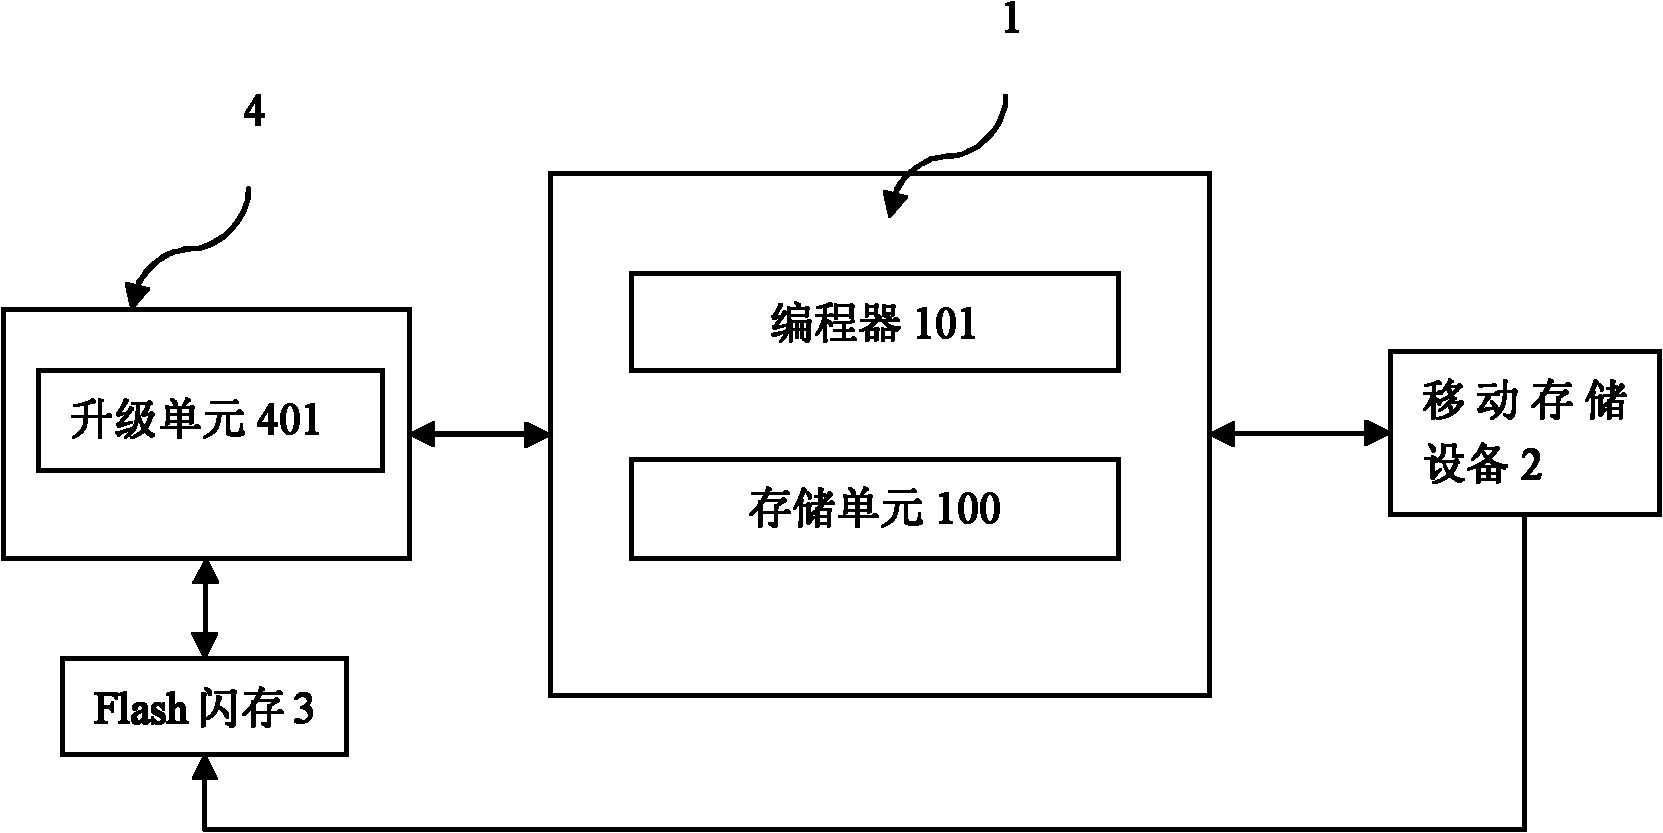 Embedded system software upgrading method and system